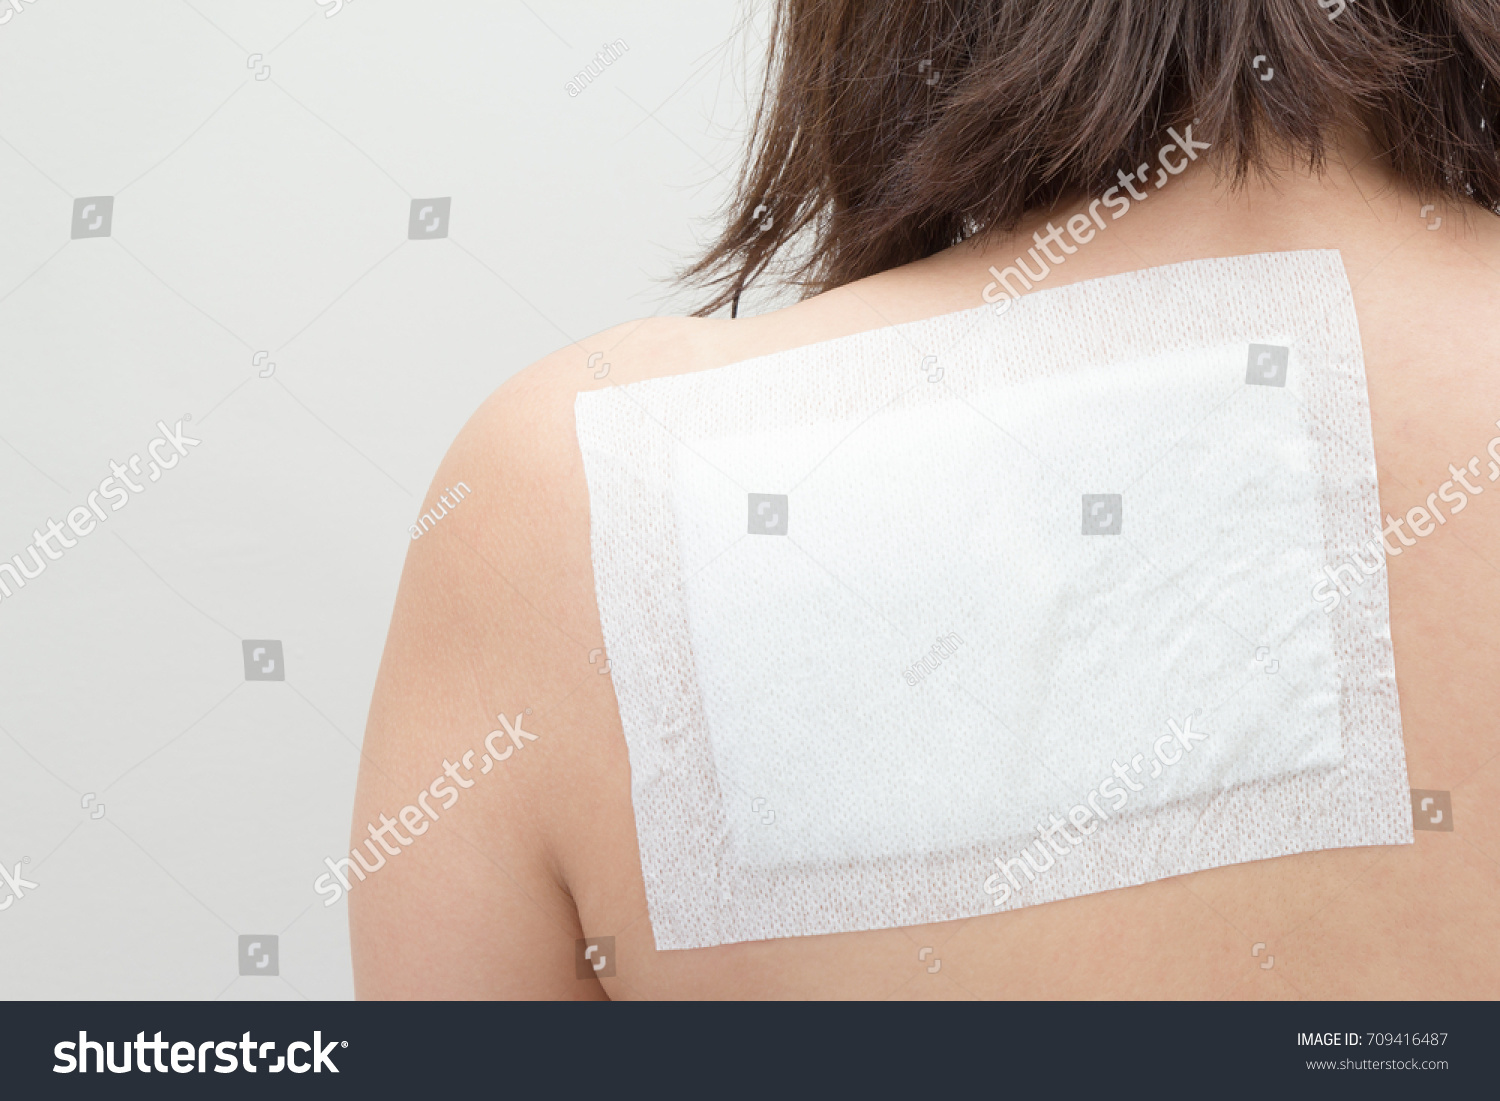 medicated pain relief patch in back of female #709416487